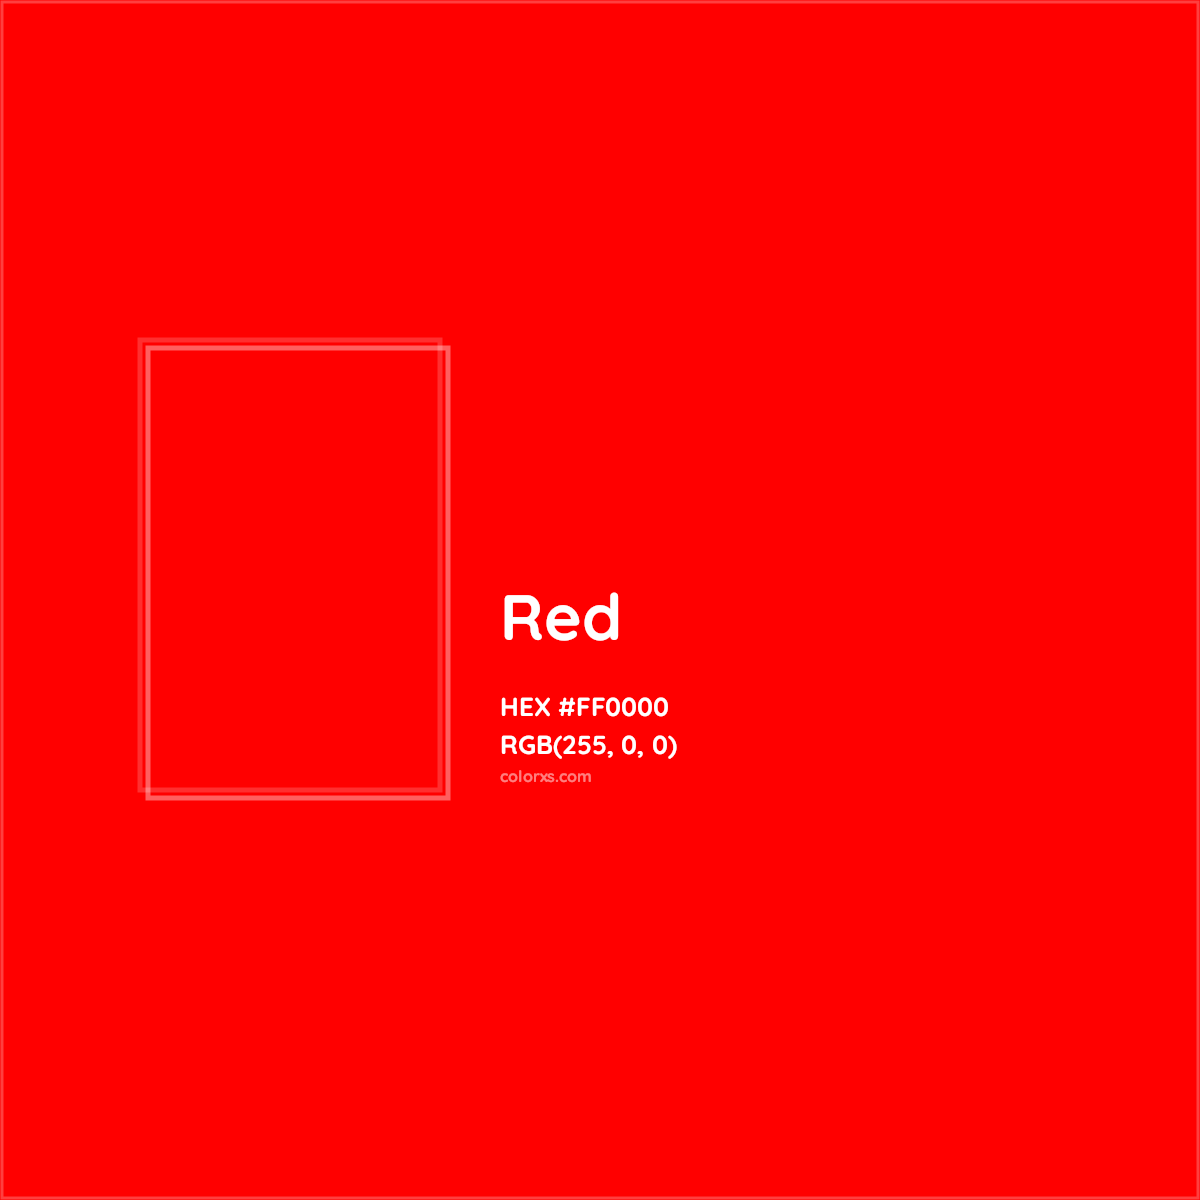 HEX #FF0000 Red - Color Code